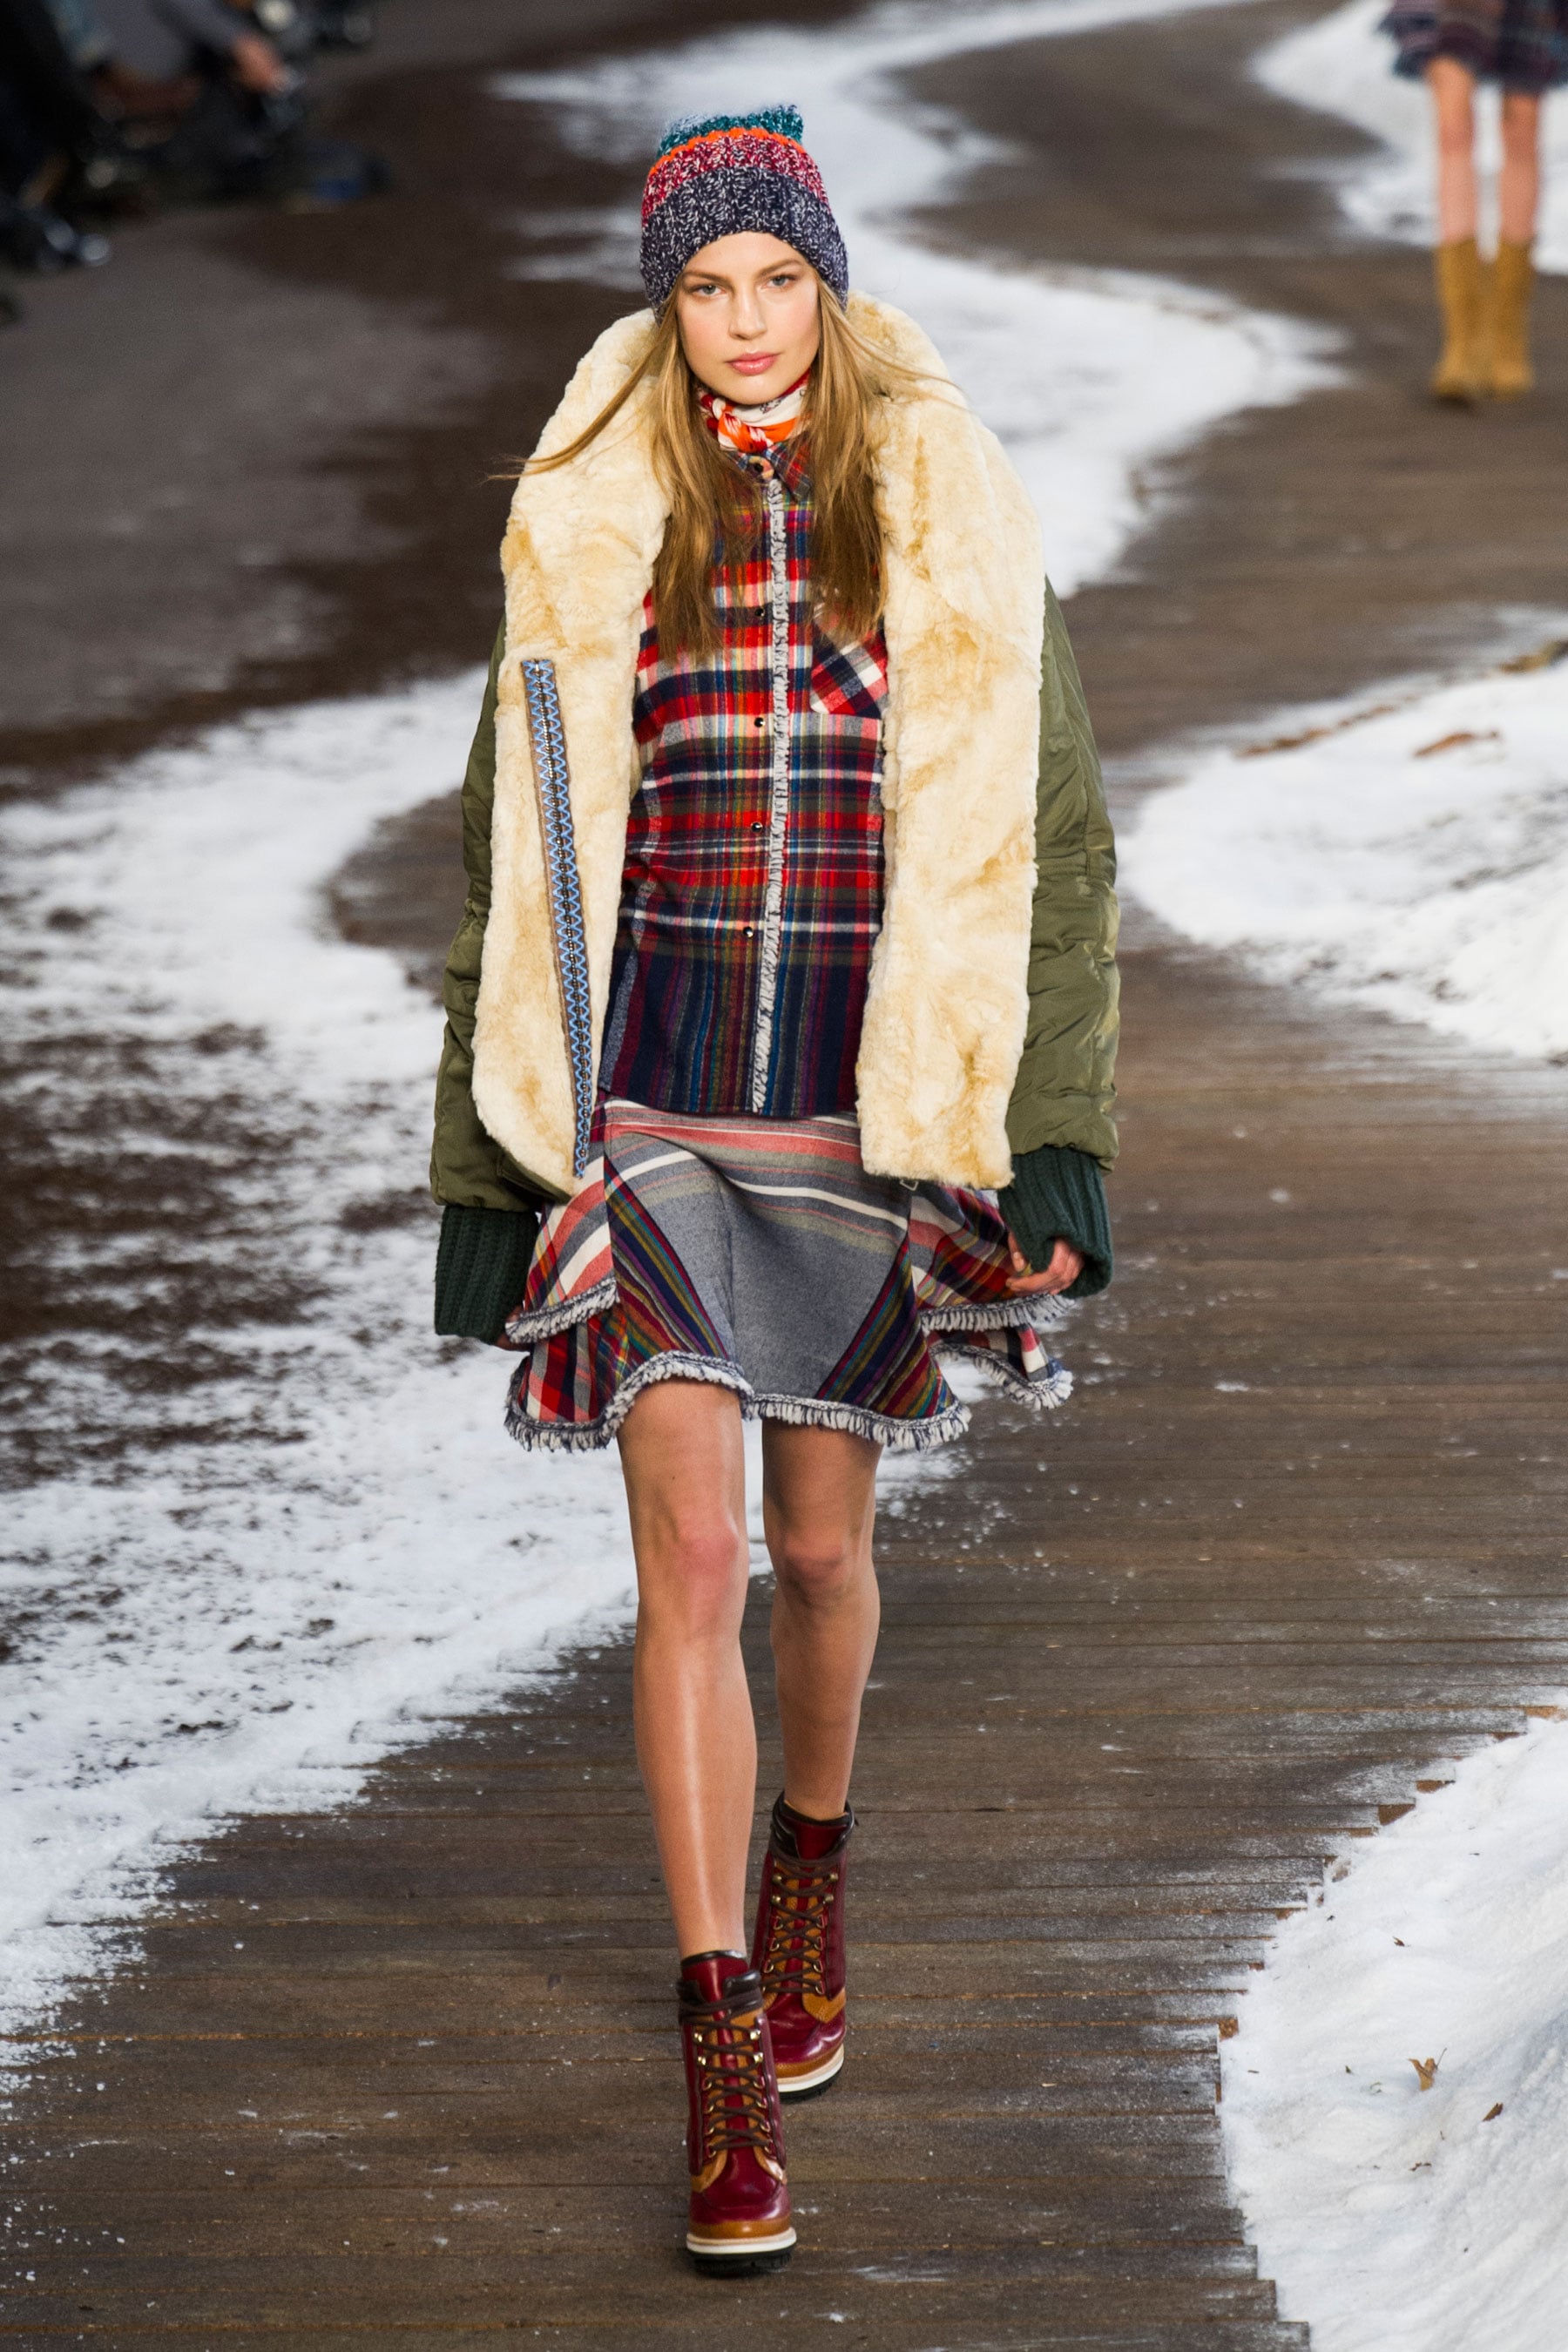 Matron lettergreep Straat Tommy Hilfiger Fall 2014 | We Want to Do More Than Après-Ski With Tommy  Hilfiger | POPSUGAR Fashion Photo 2